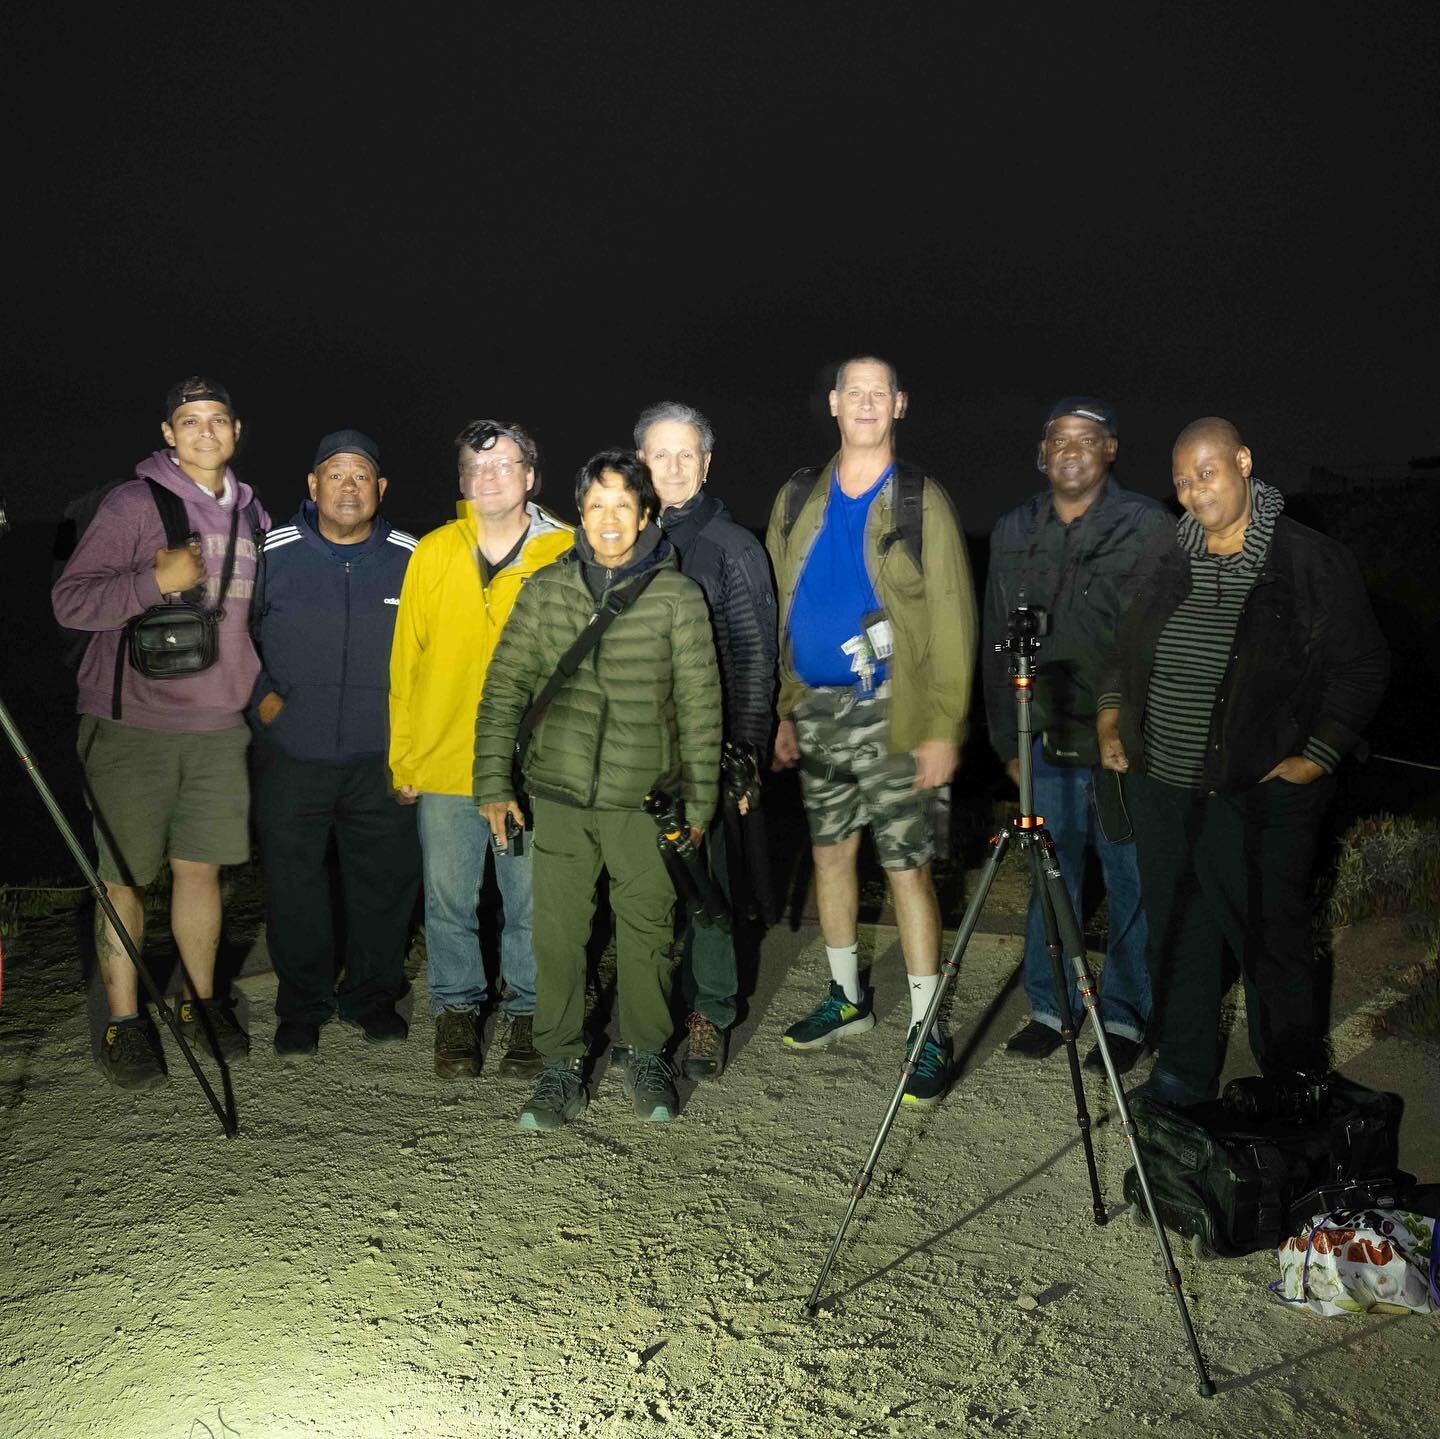 Some photos from last Thursday eve&rsquo;s field trip out to Pigeon Point Lighthouse in Pescadero.

Too foggy for supermoon shots, but a perfect spot for a summer night.

Renee and I were joined by Connie Louis-Handelman and her partner Rob, both gre